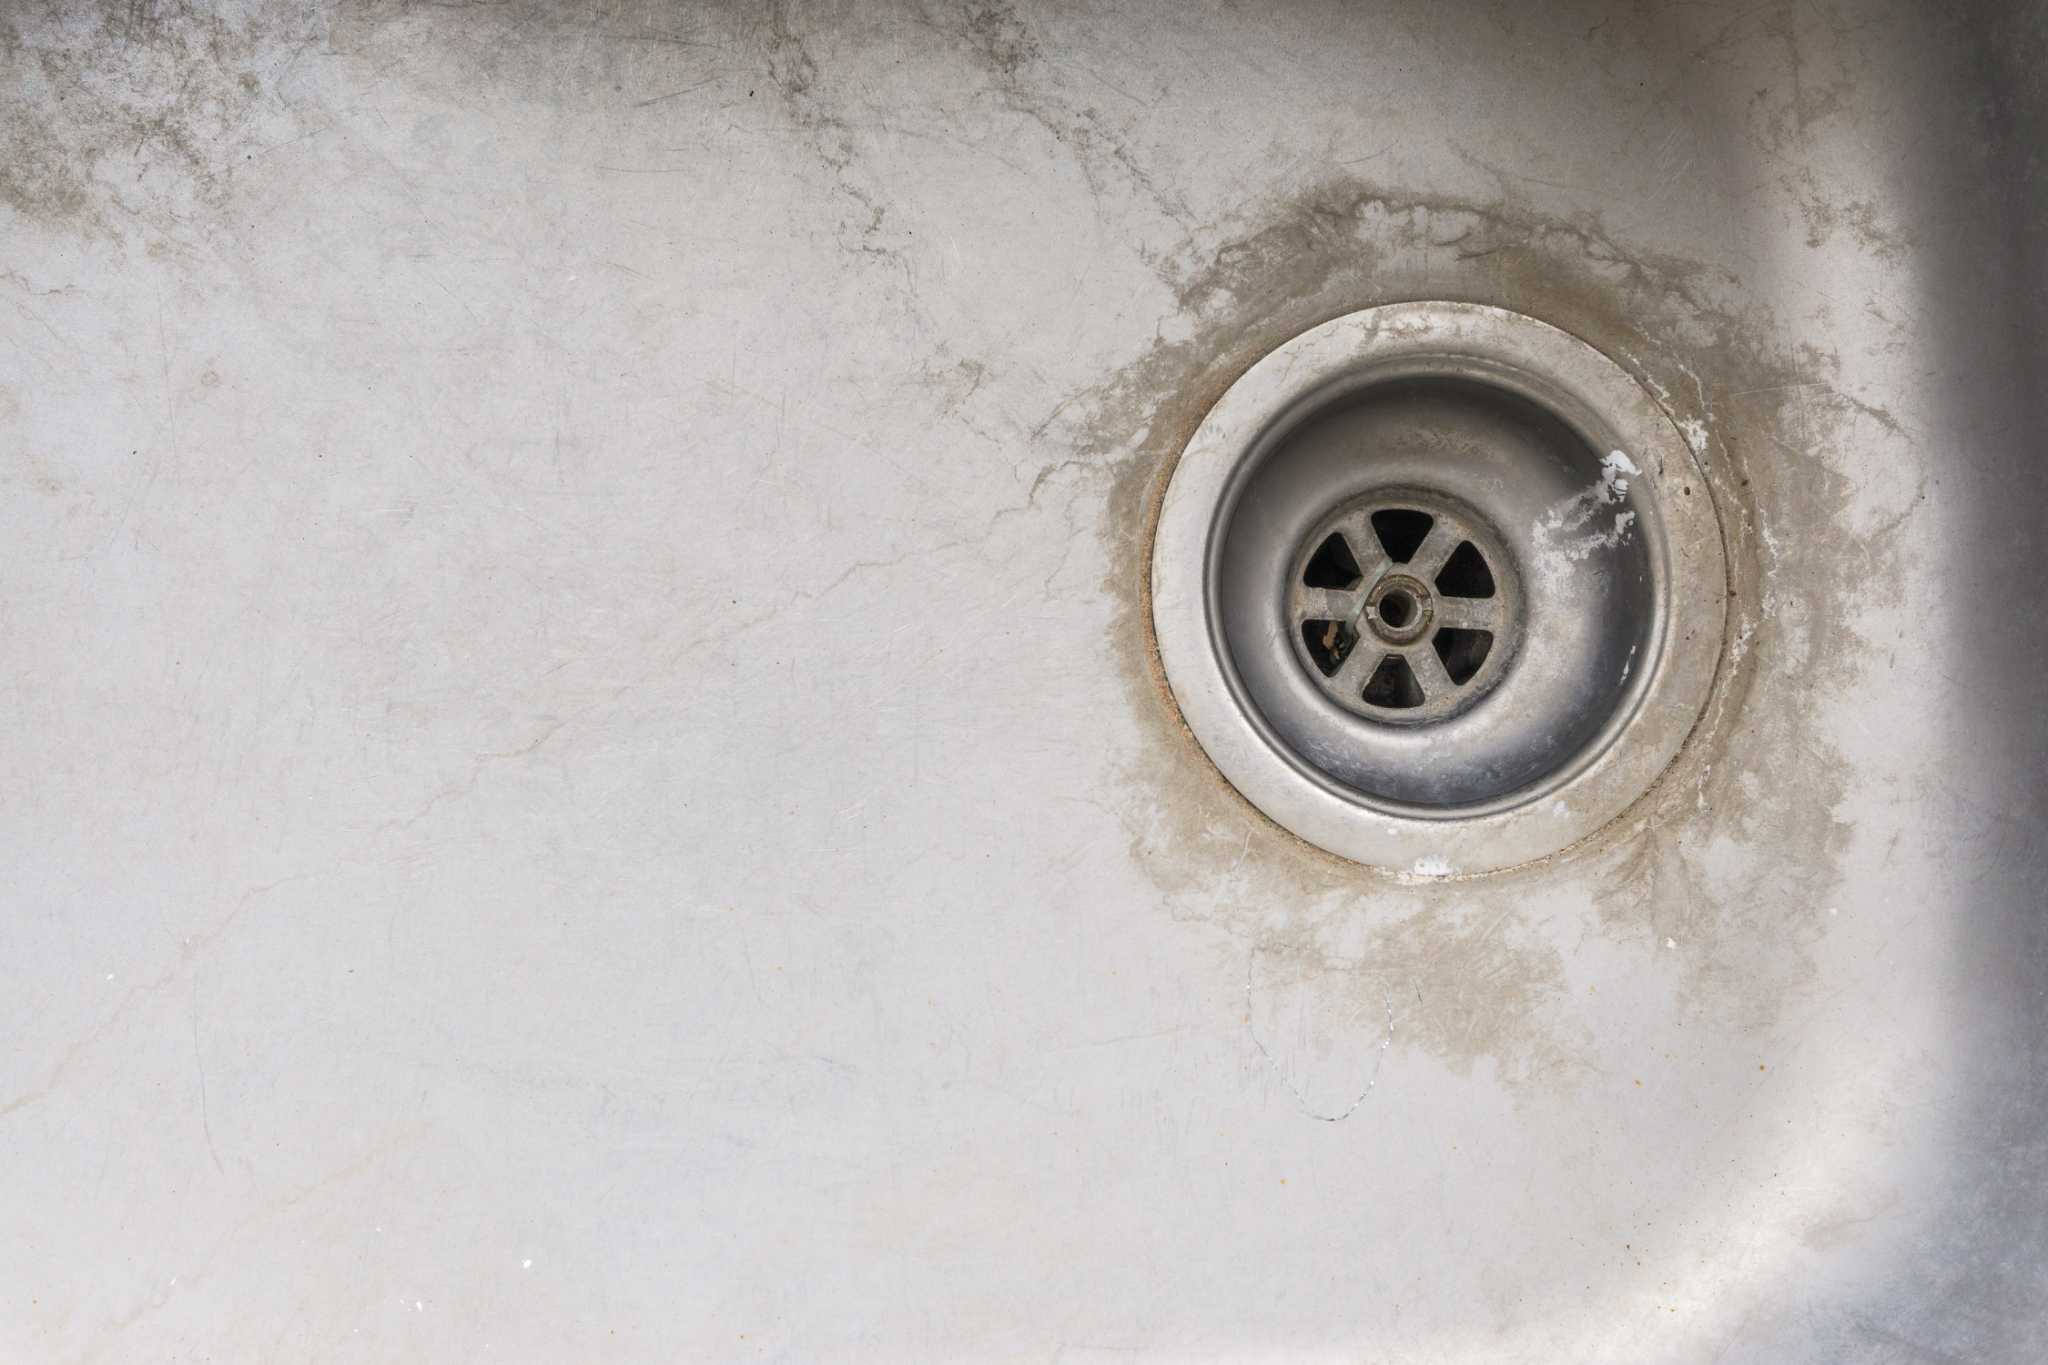 How to Remove Black Mold in Sink Drains Effectively